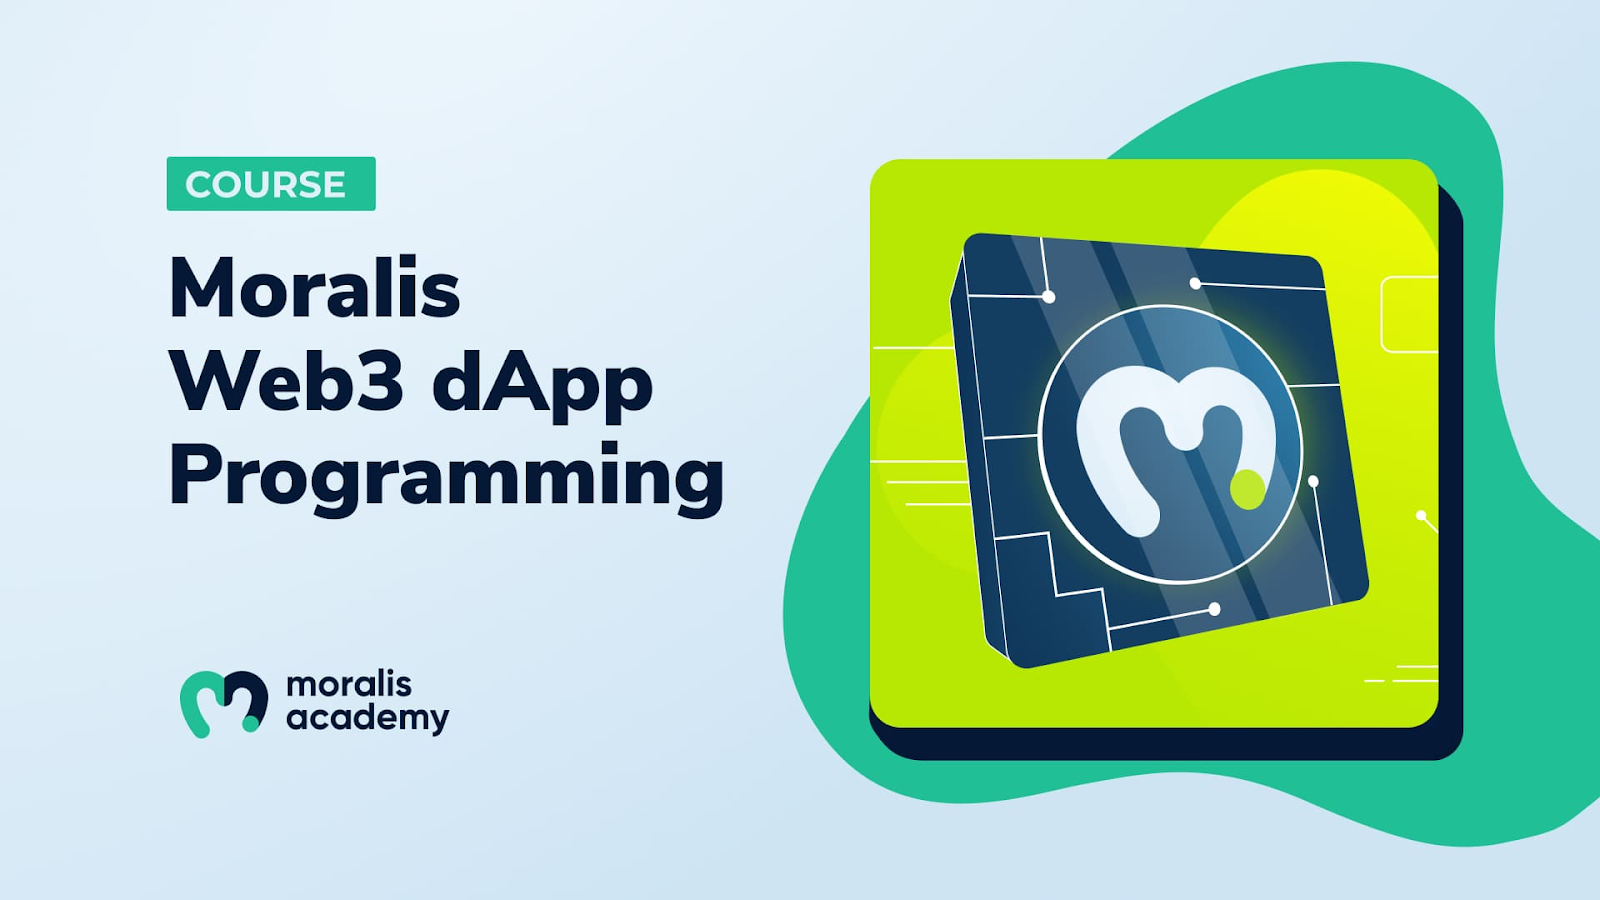 Learn Web3 Dapp Programming at Moralis Academy to explore entry-level Web3 jobs!